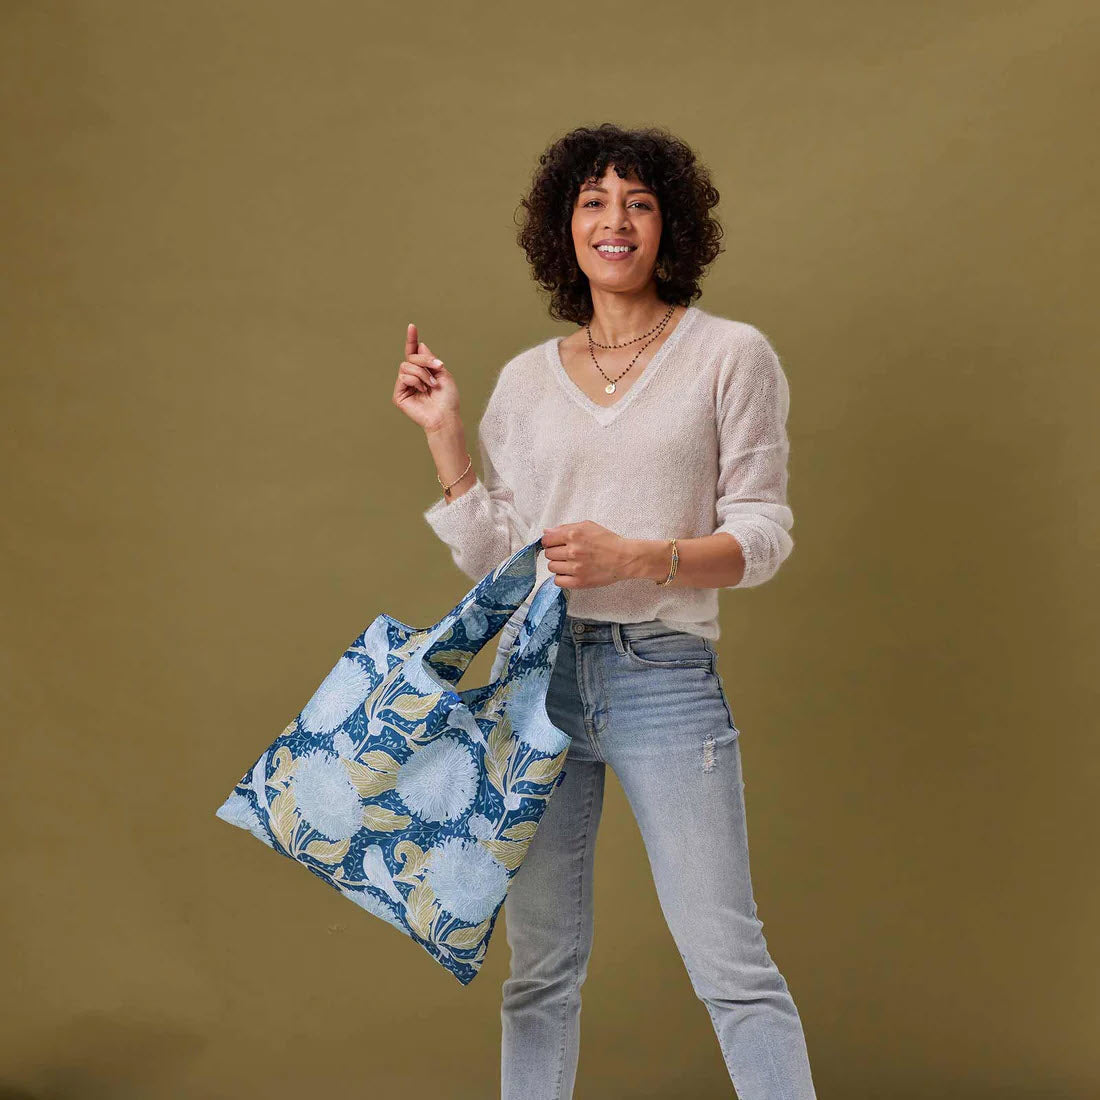 A woman with curly hair, smiling and pointing upwards, holding a colorful Rockflowerpaper BLU BAG CHRYSANTHEMUM tote bag, dressed in a beige sweater and ripped jeans against a tan background.